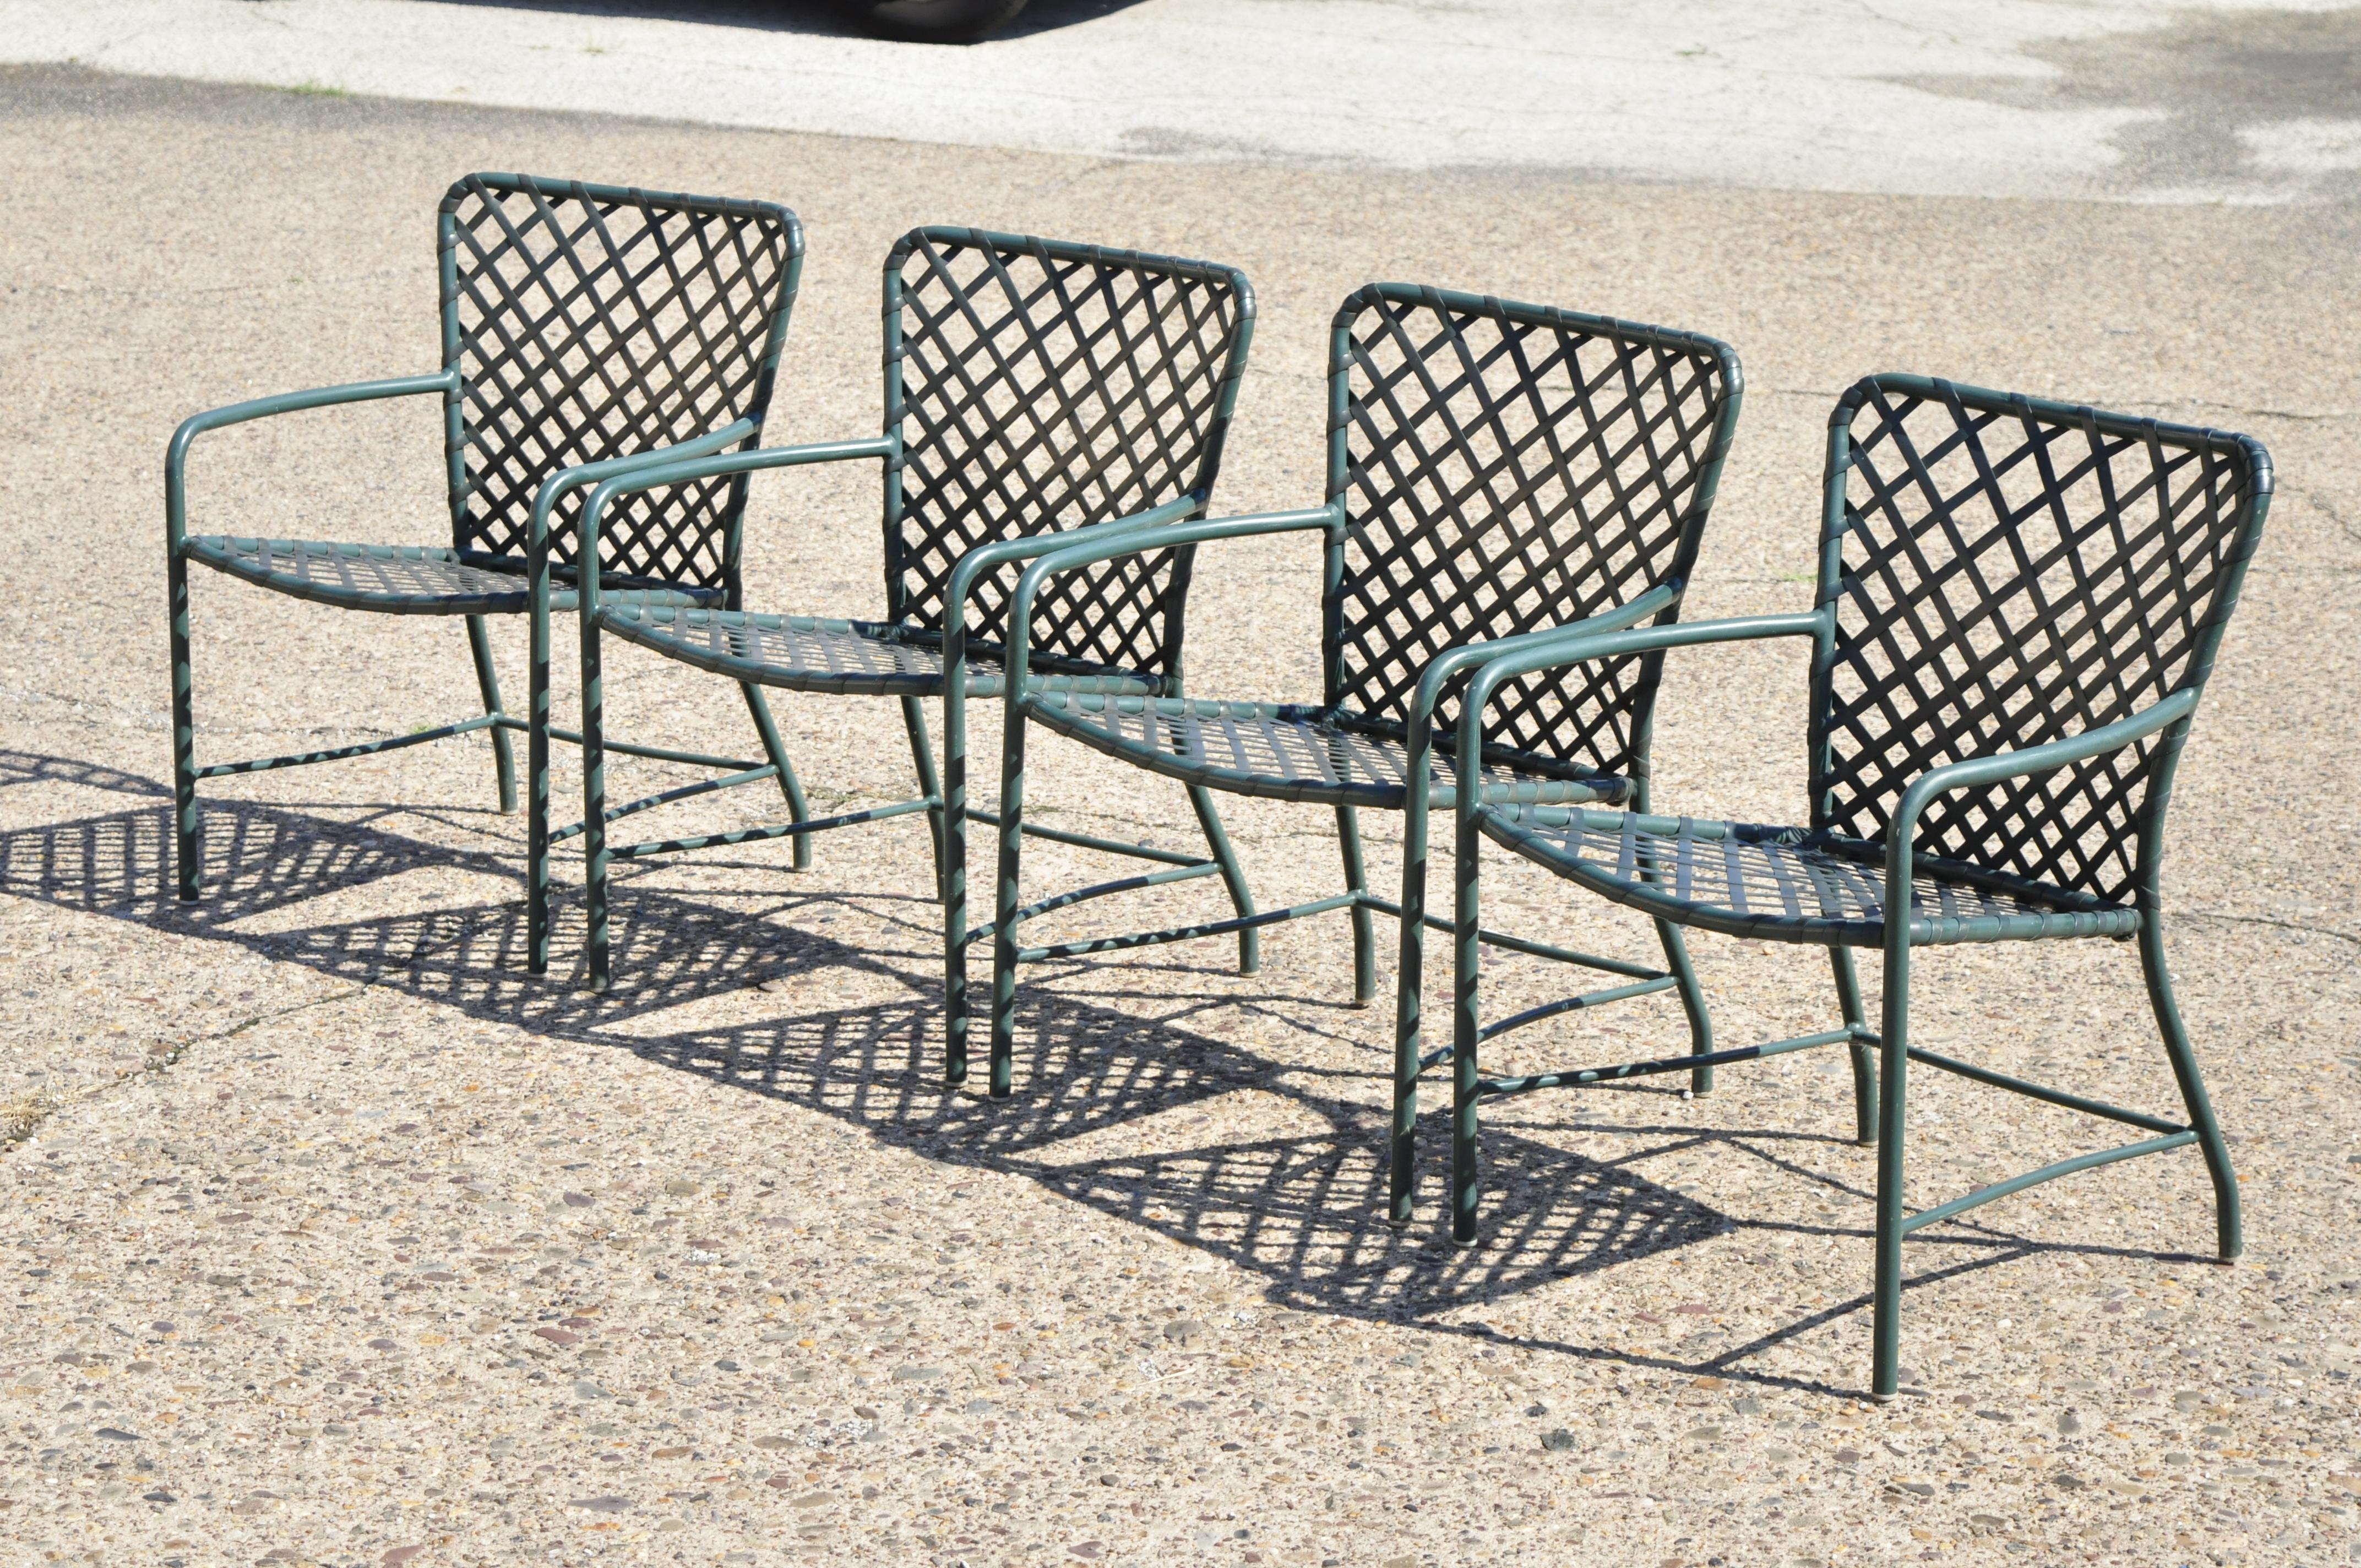 Brown Jordan Tamiami green aluminum vinyl strap patio pool armchairs - set of 4. Item features woven vinyl seats and backs, aluminum construction, clean modernist lines, quality American craftsmanship, great style and form, circa mid-late 20th